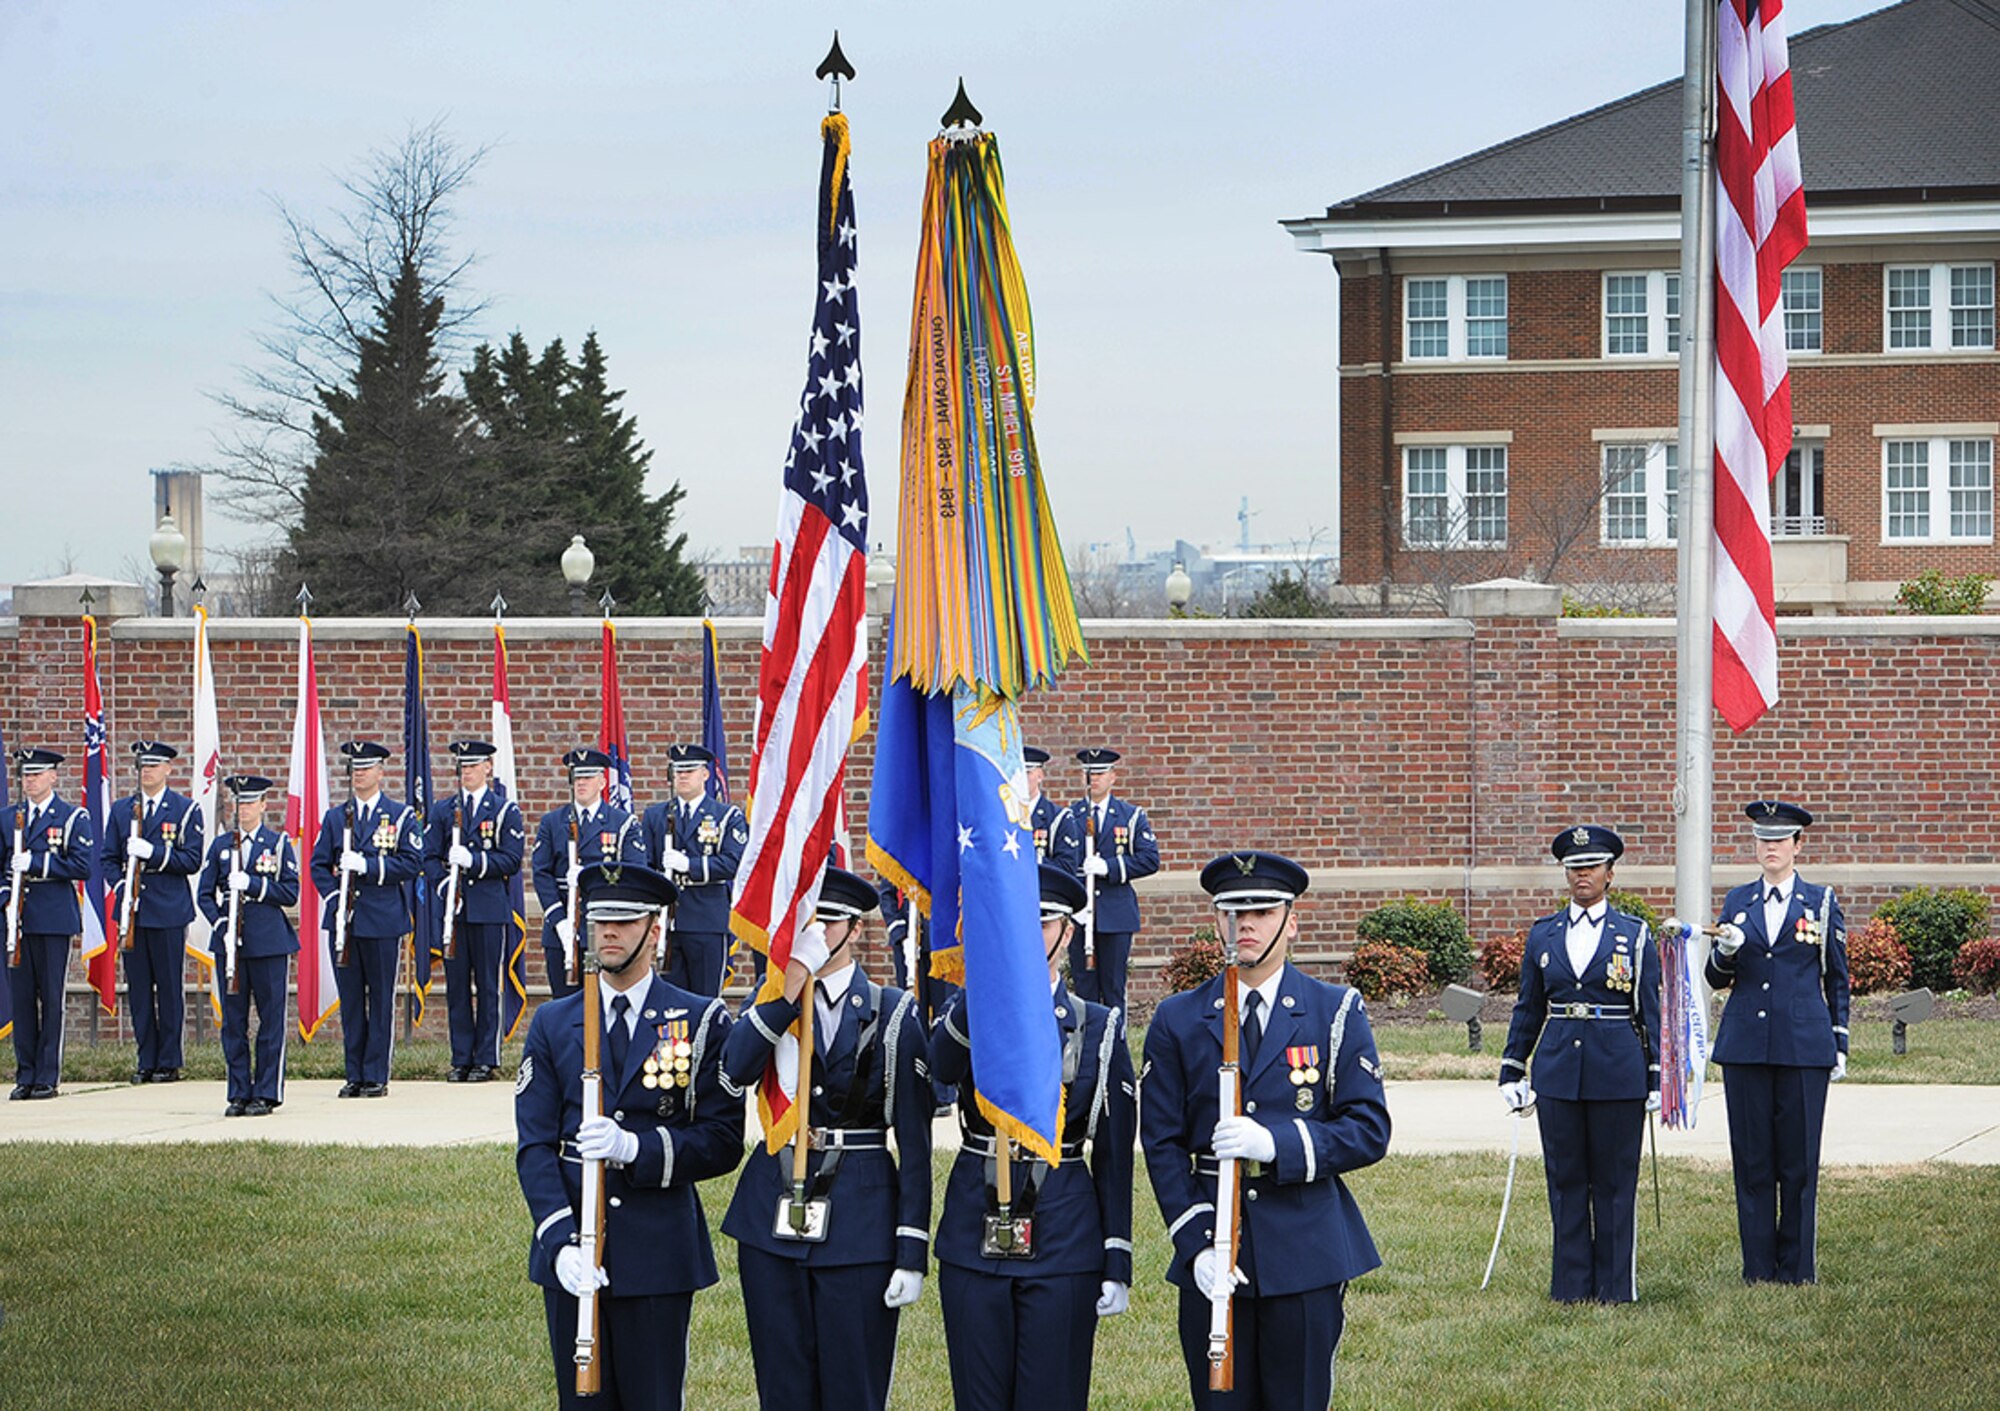 Members of the United States Air Force Honor Guard present the nation’s colors during a ceremony to recognize four of the first five female enlisted ceremonial guardsmen at Joint Base Anacostia-Bolling, Mar. 8. The event included a formal lawn ceremony, a ribbon-cutting to christen a display case honoring the first women to join the Air Force Honor Guard, and a panel discussion. (U.S. Air Force photo/Jim Lotz)